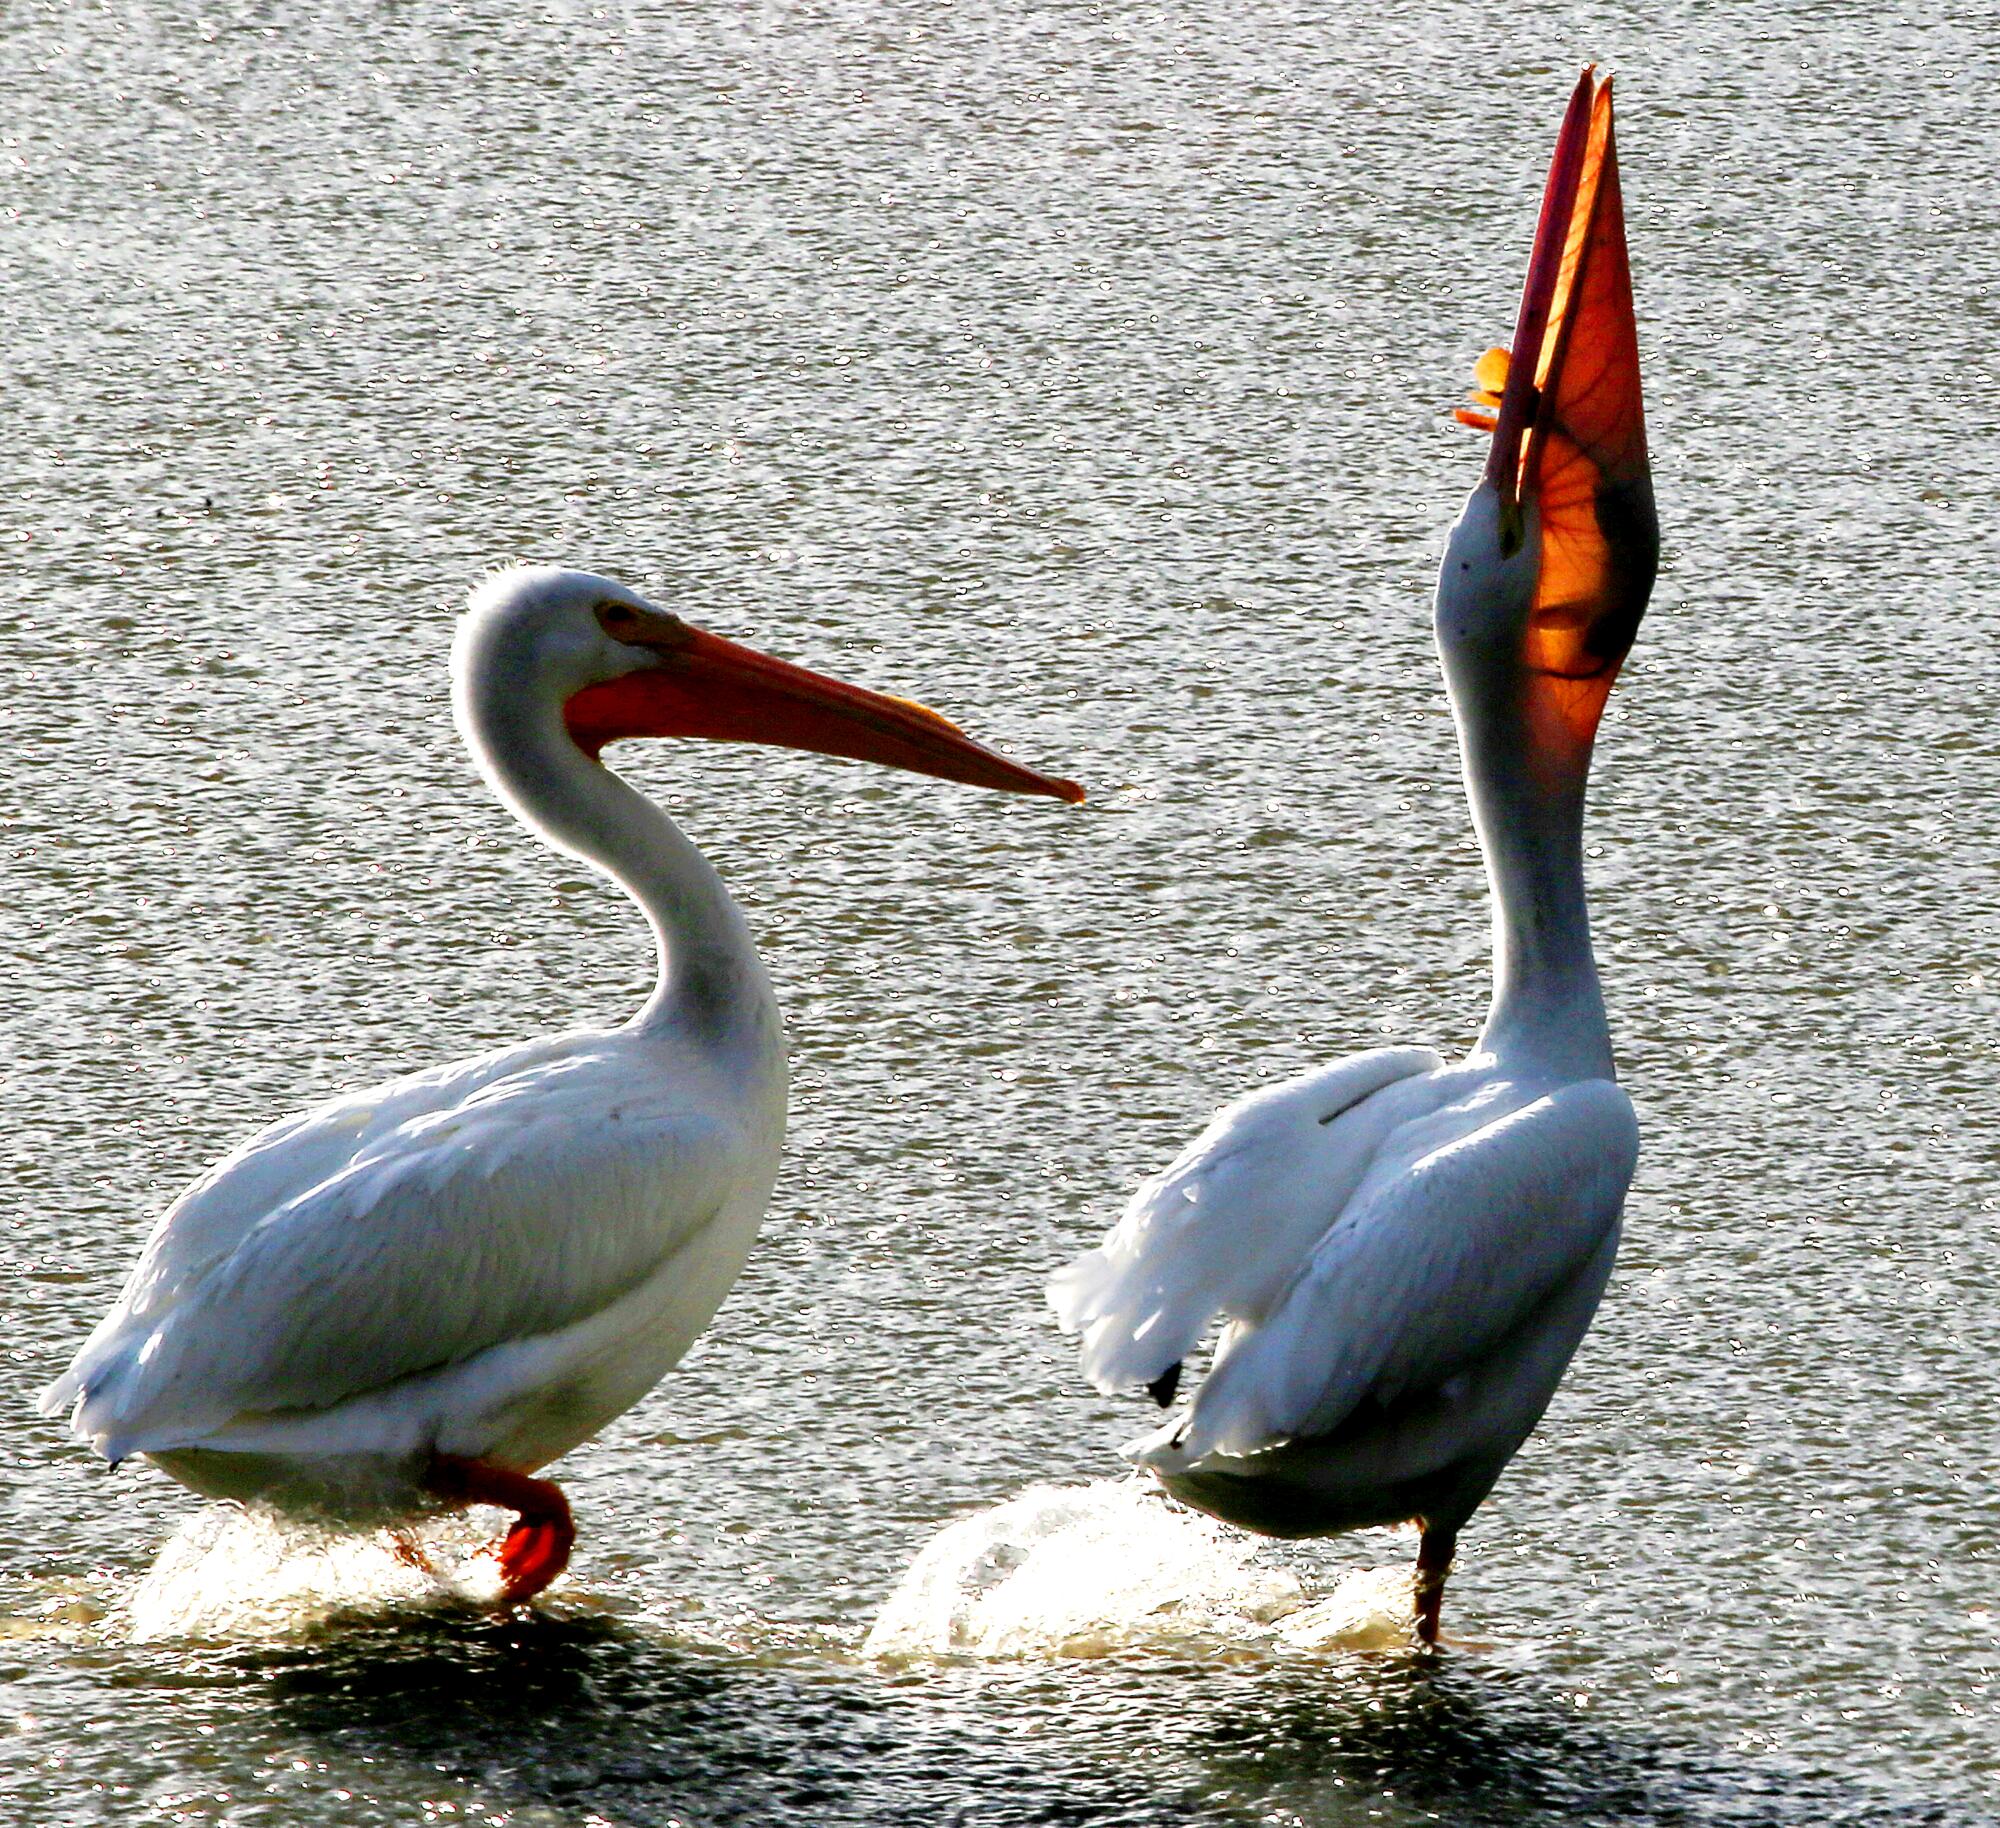 Pelicans feed in the Los Angeles River in Long Beach after the recent storm.